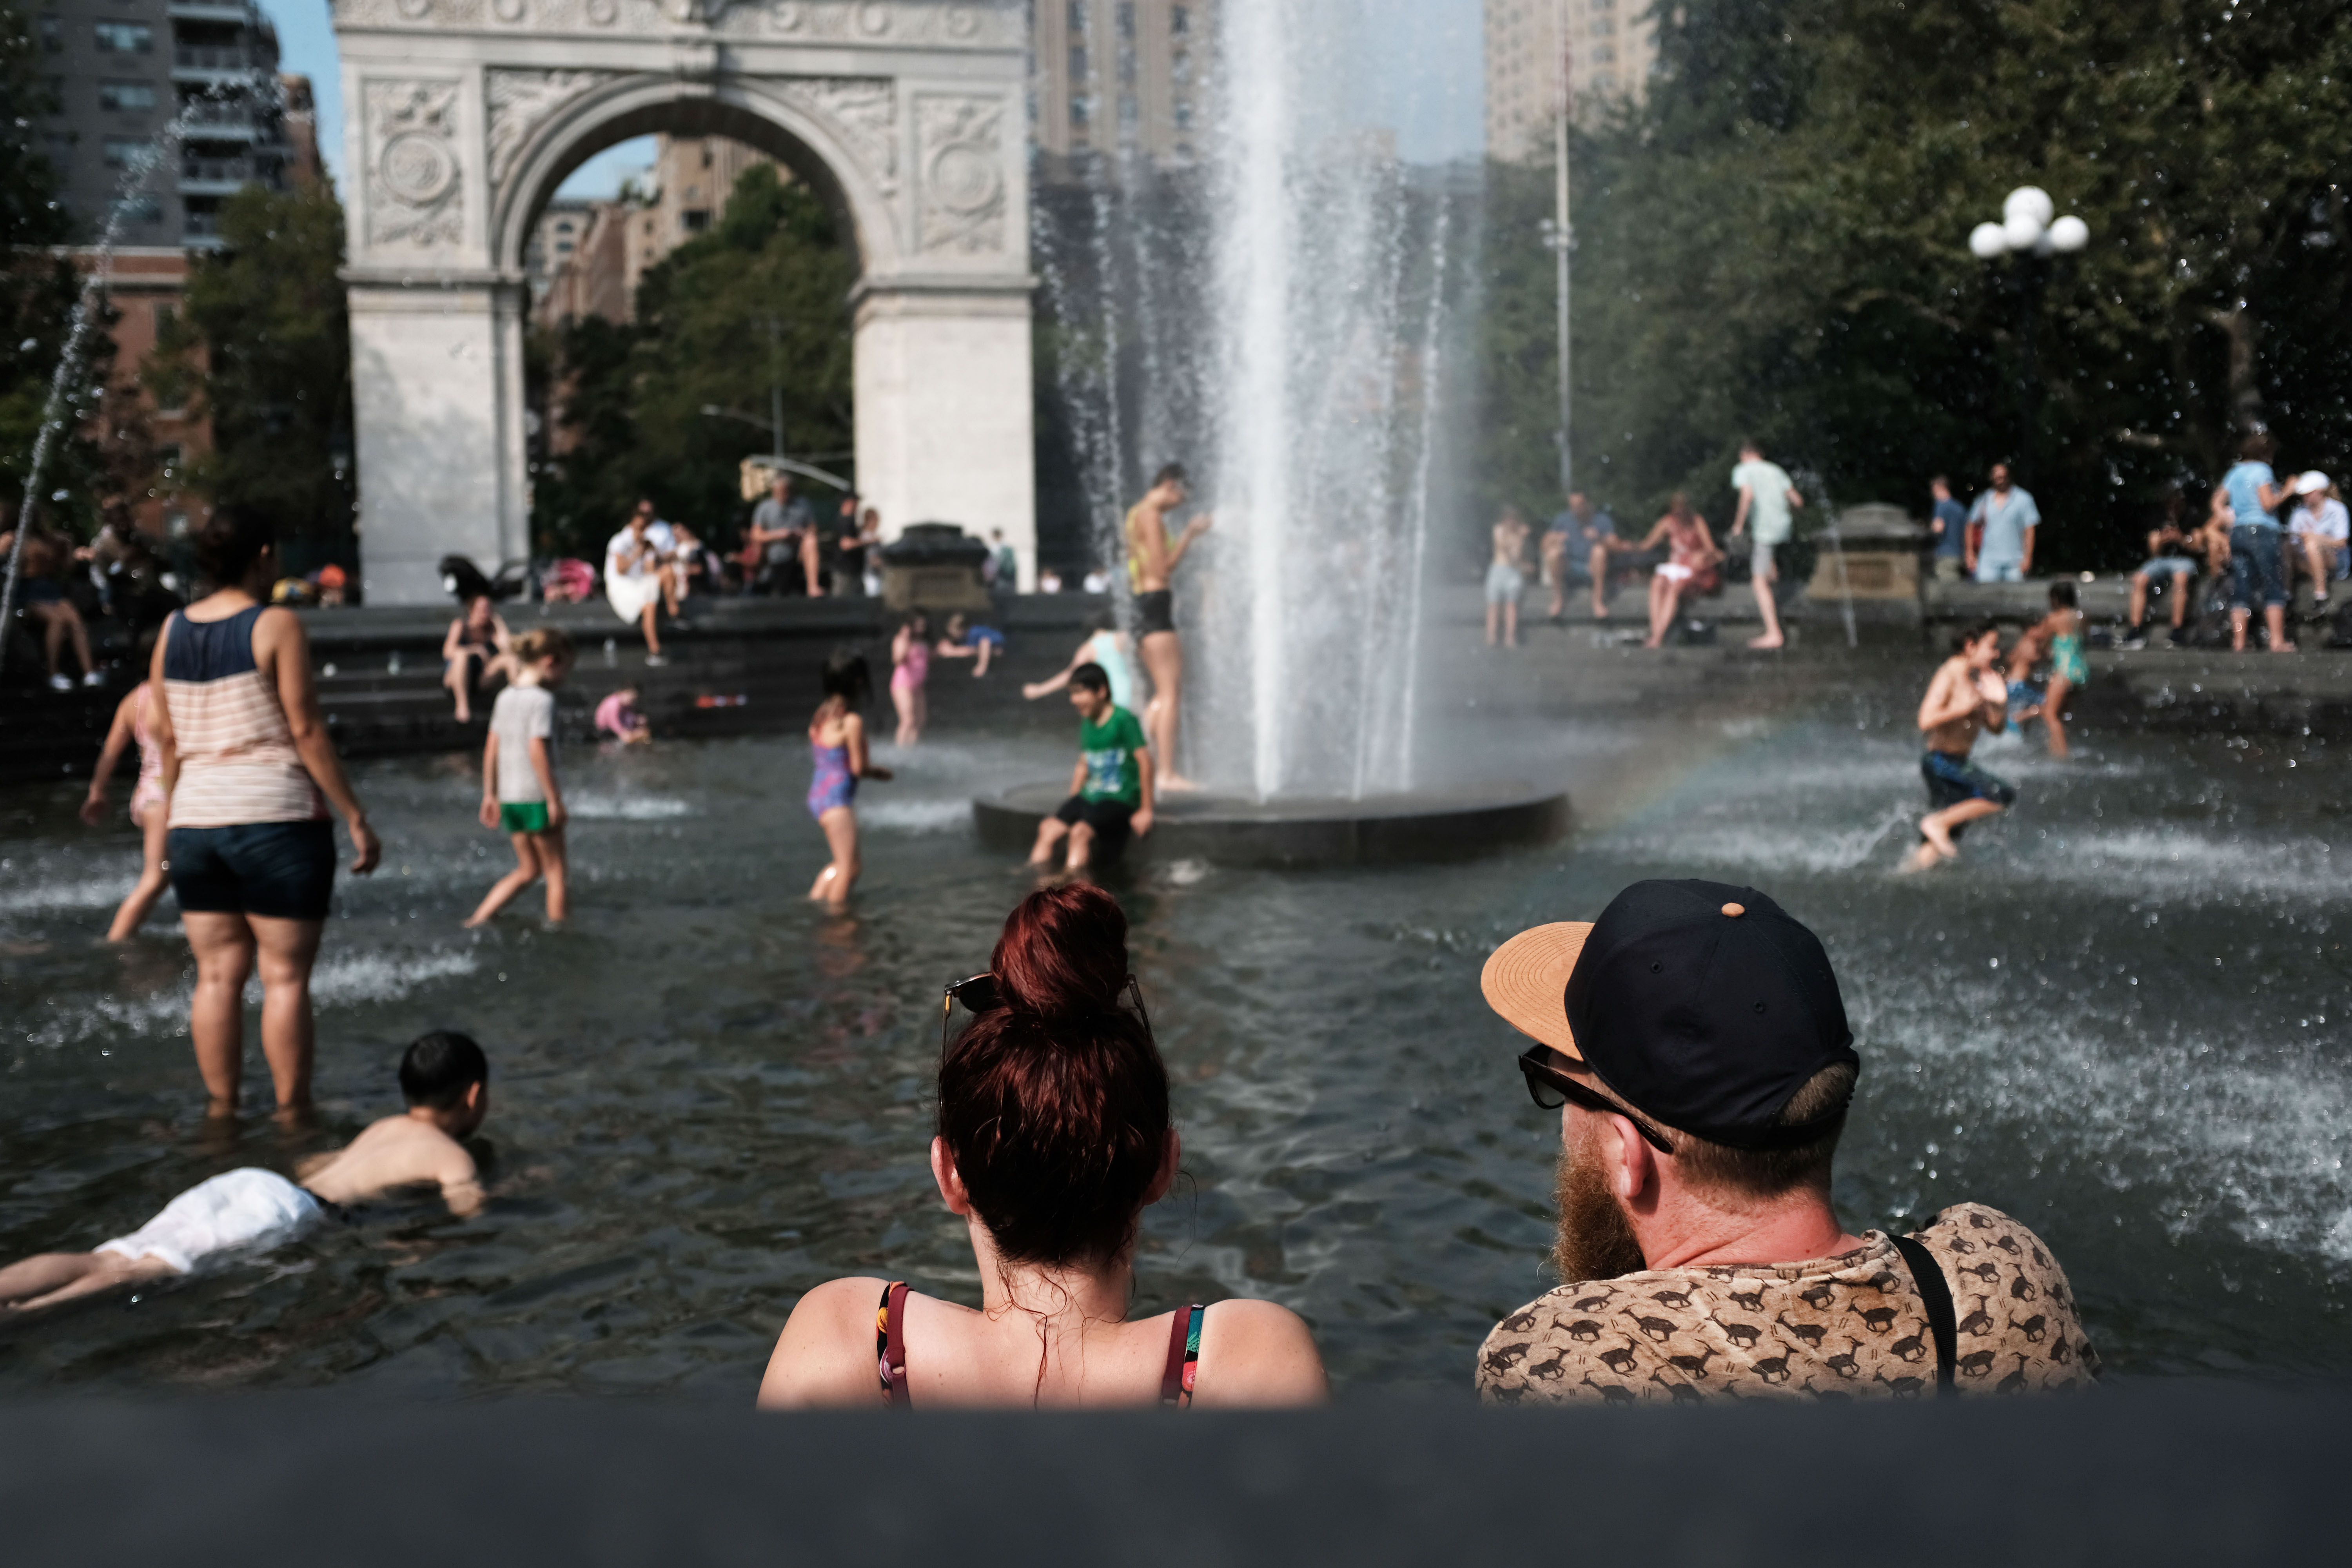 U.S. heat wave East Coast swelters, Midwest gets temperature respite